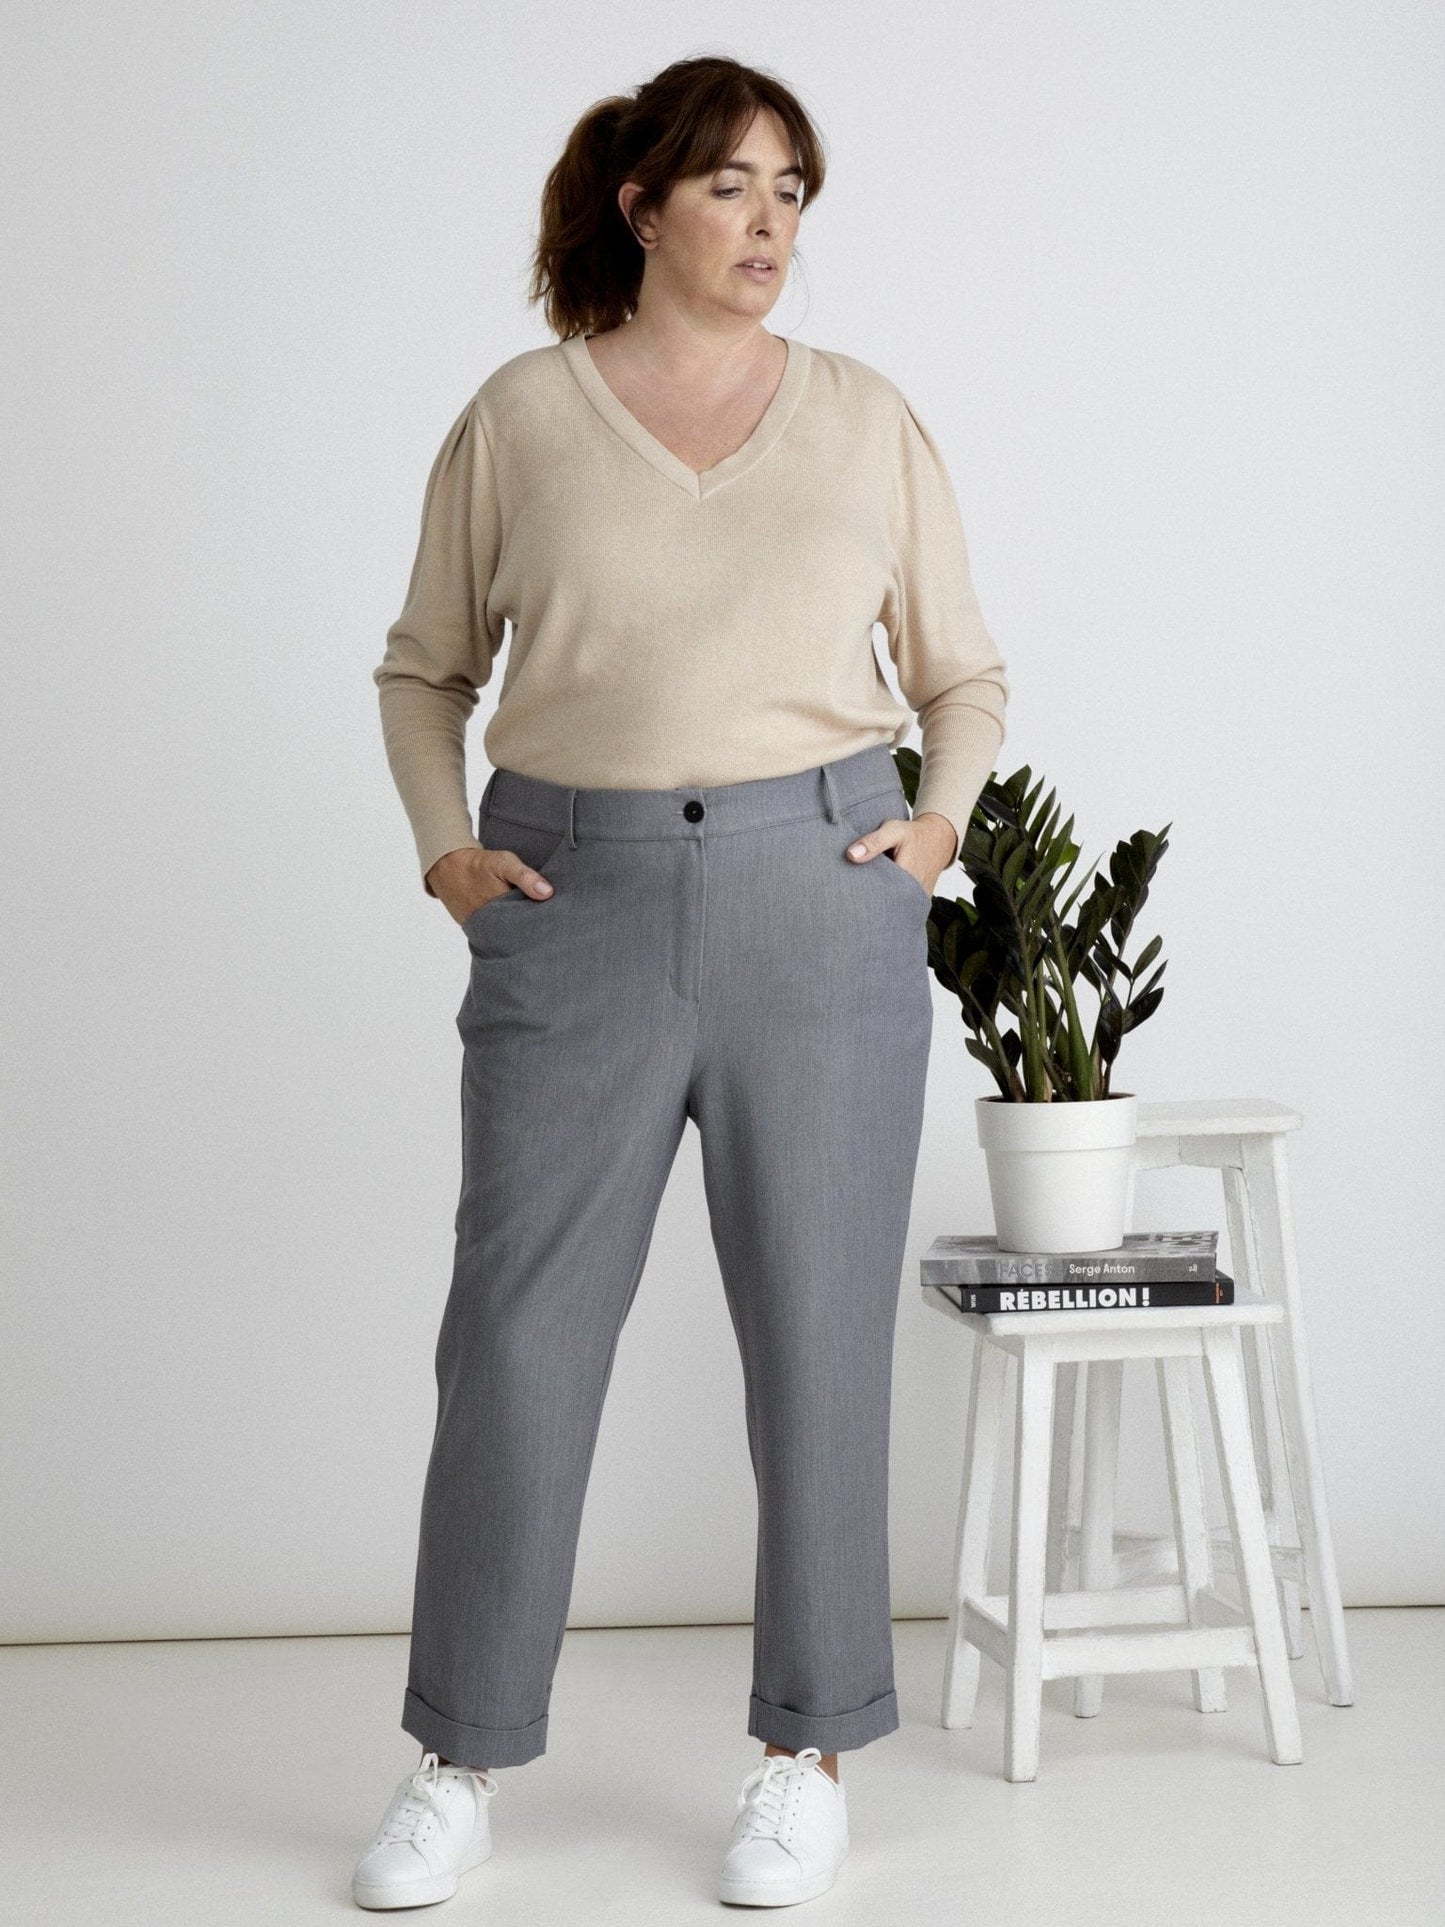 Les Militantes - Maurice 7/8 grey pants large size chic, trendy wide hips quality made in France 